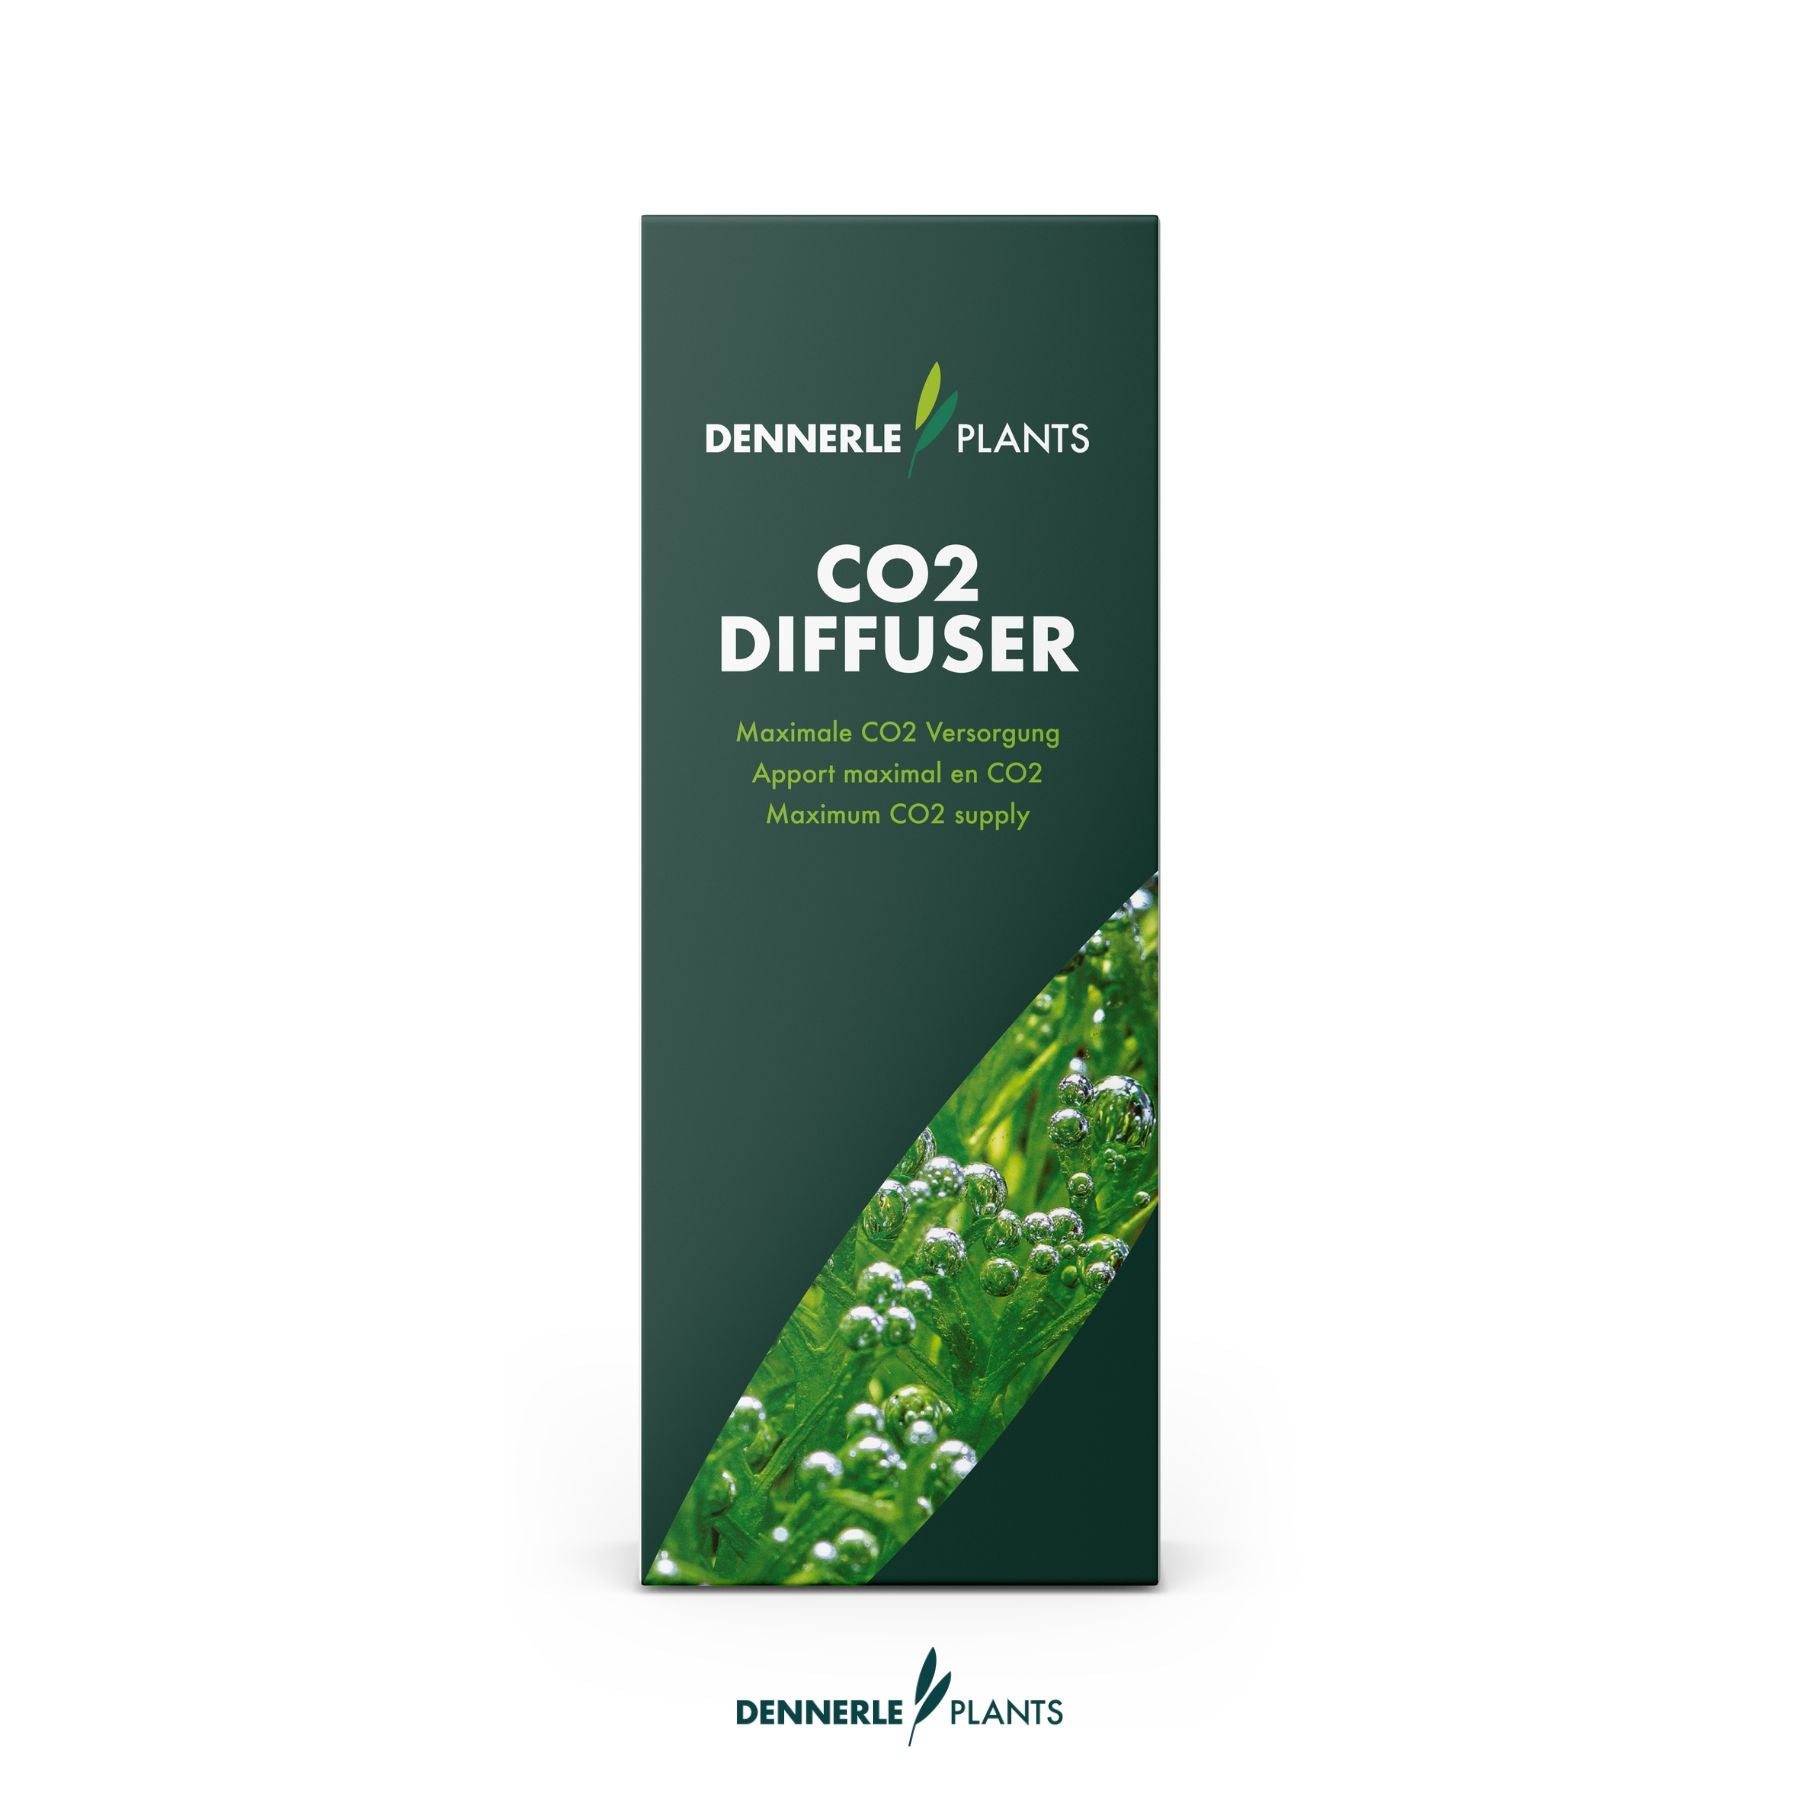 Dennerle Plants CO2 Diffuser product picture